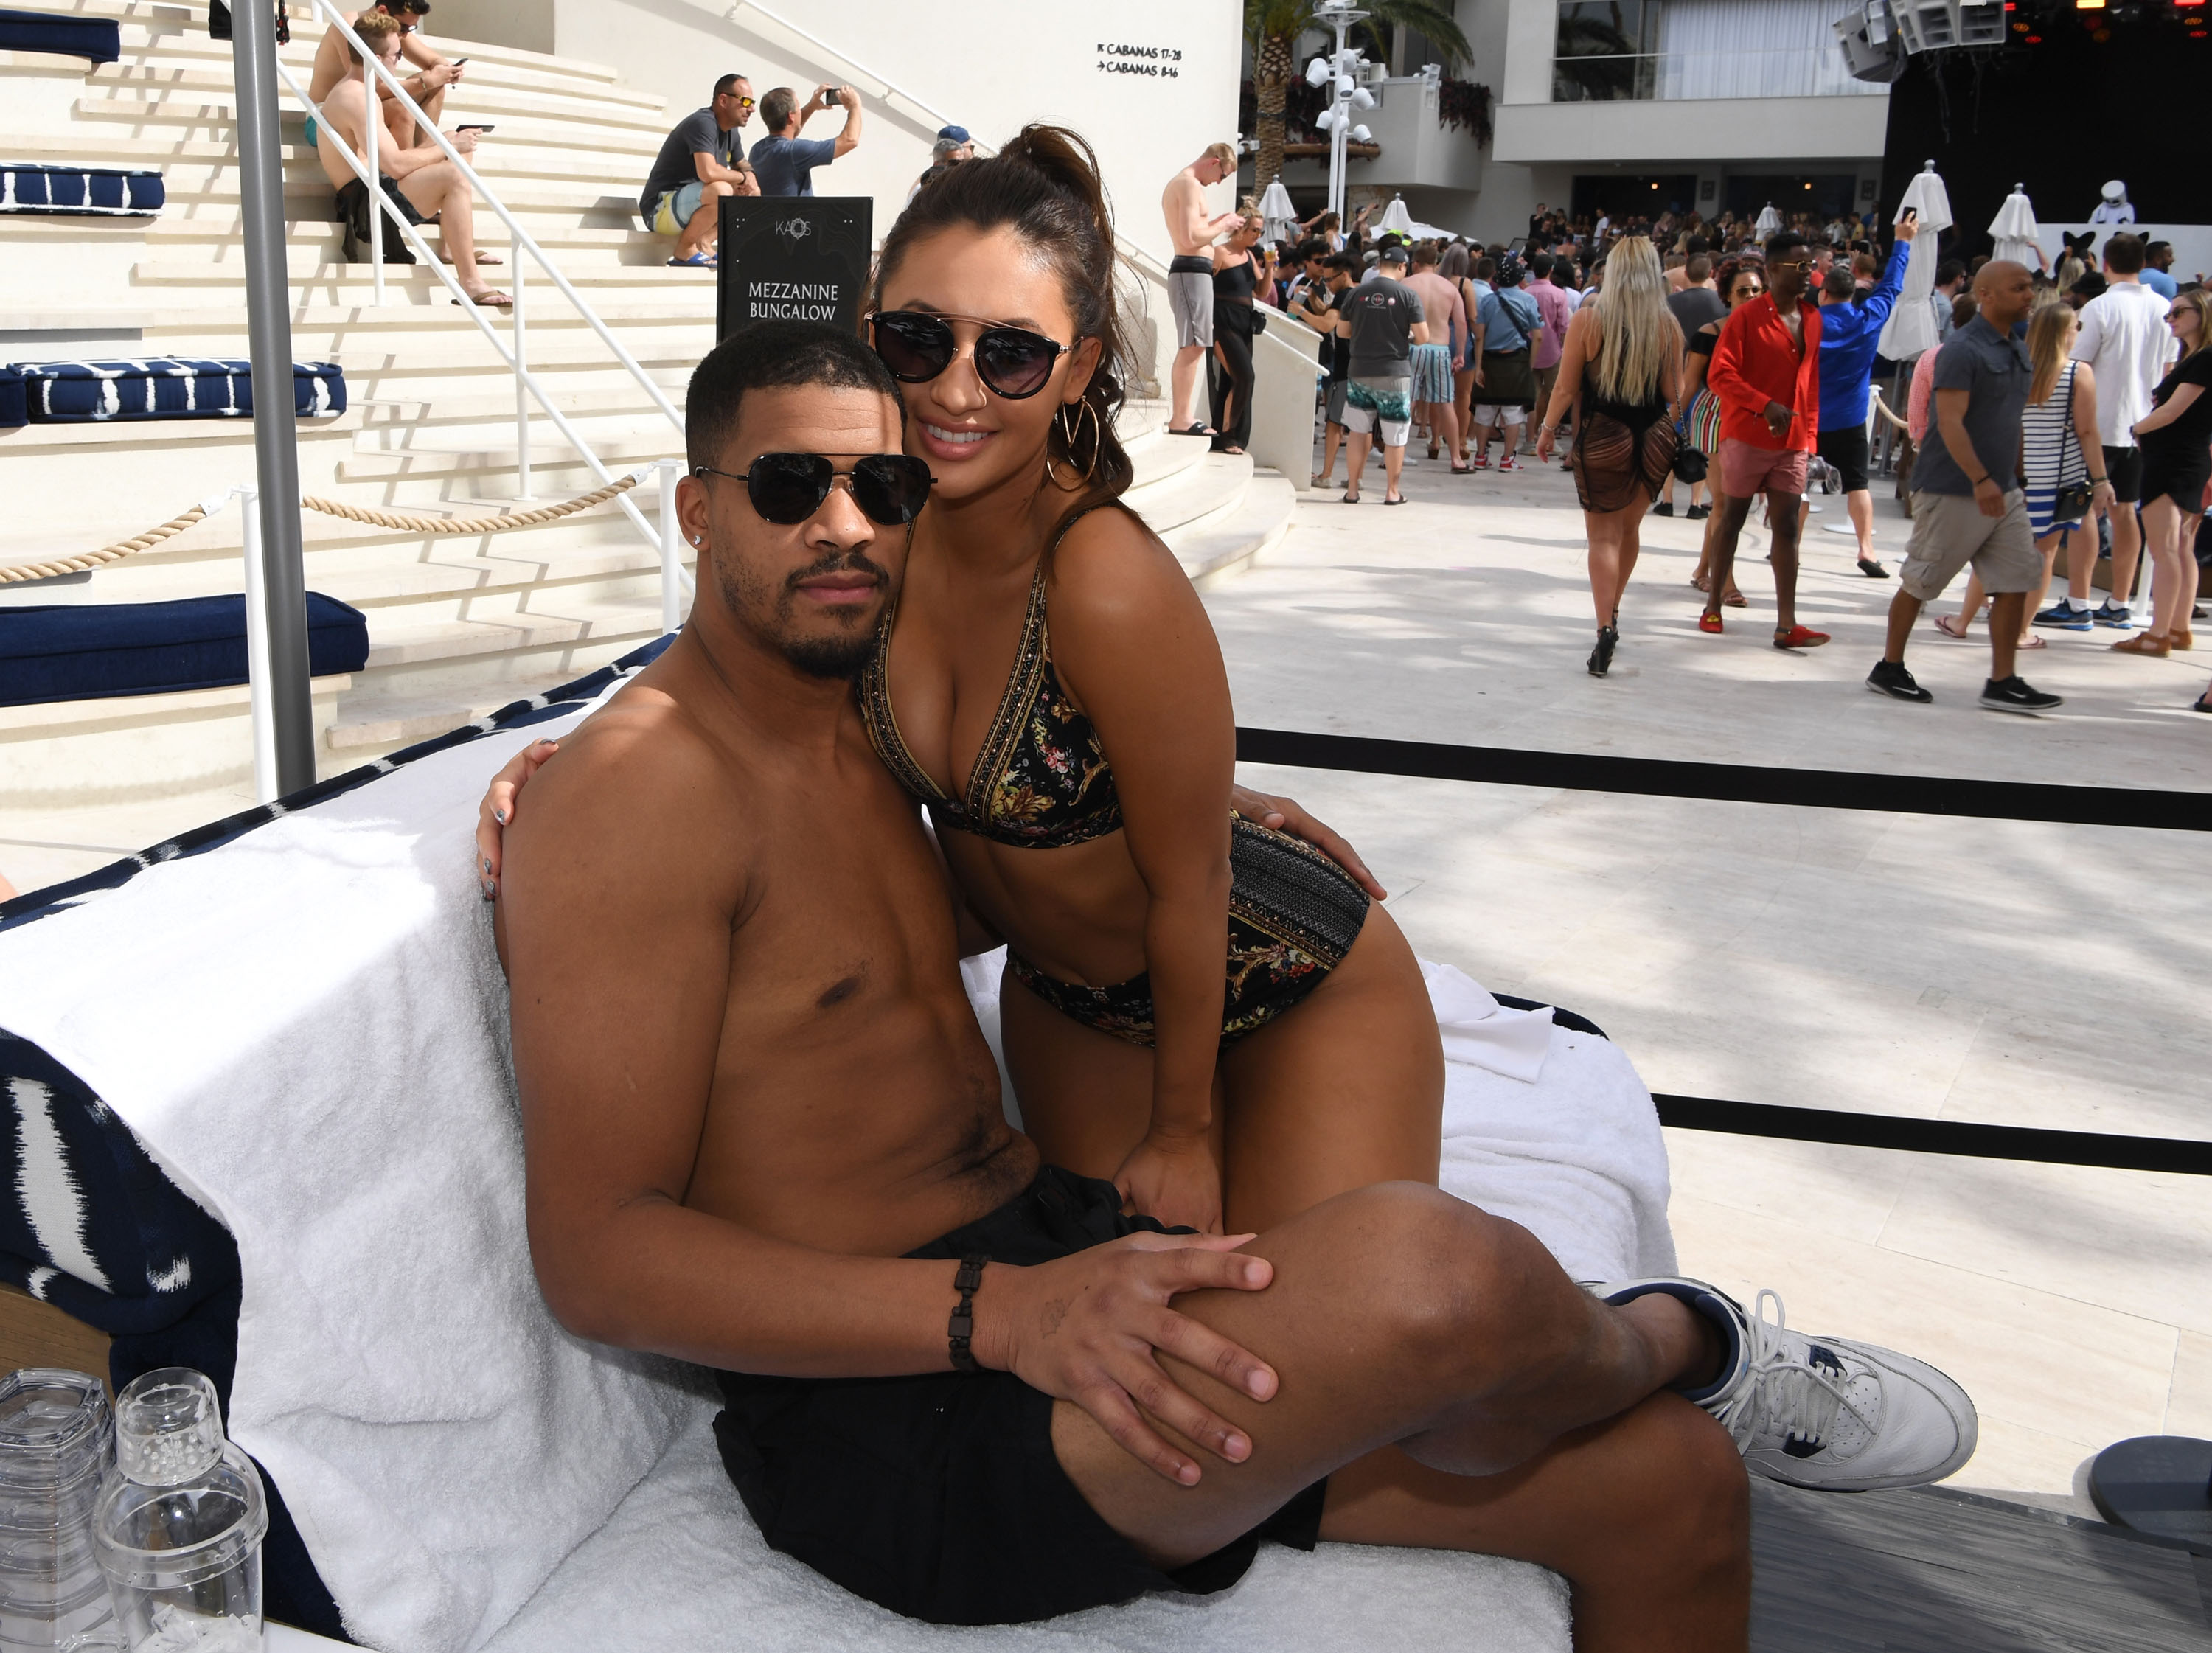 Cinematographer Christian Adkins and Francia Raisa attend Palms Casino Resort's KAOS Dayclub for grand opening weekend on April 6, 2019, in Las Vegas, Nevada | Source: Getty Images